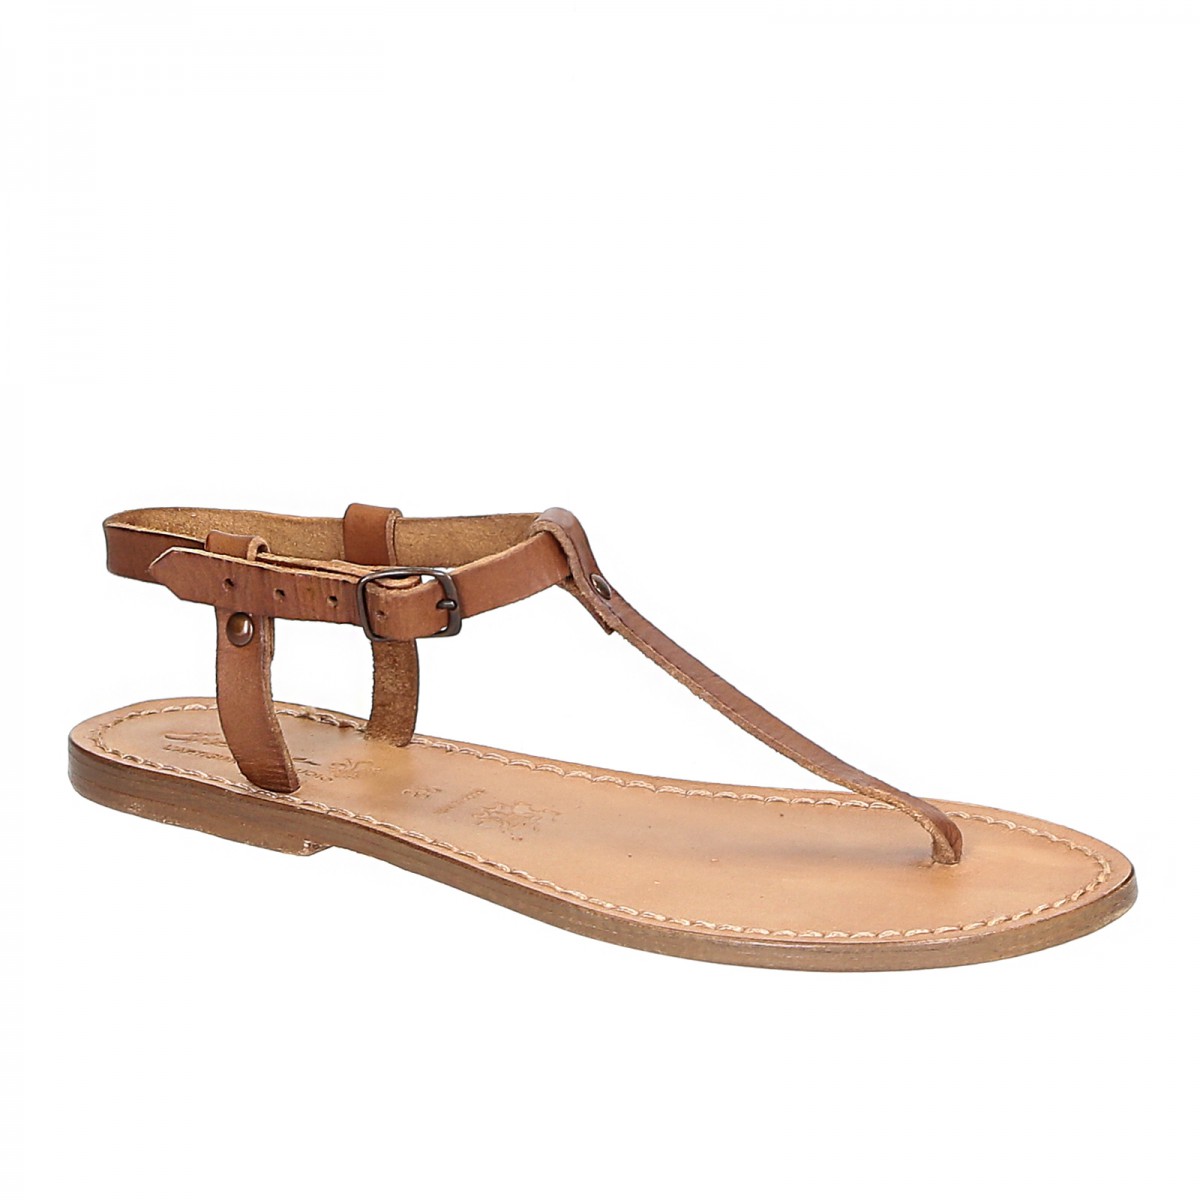 T-strap thong sandals in tan Leather 